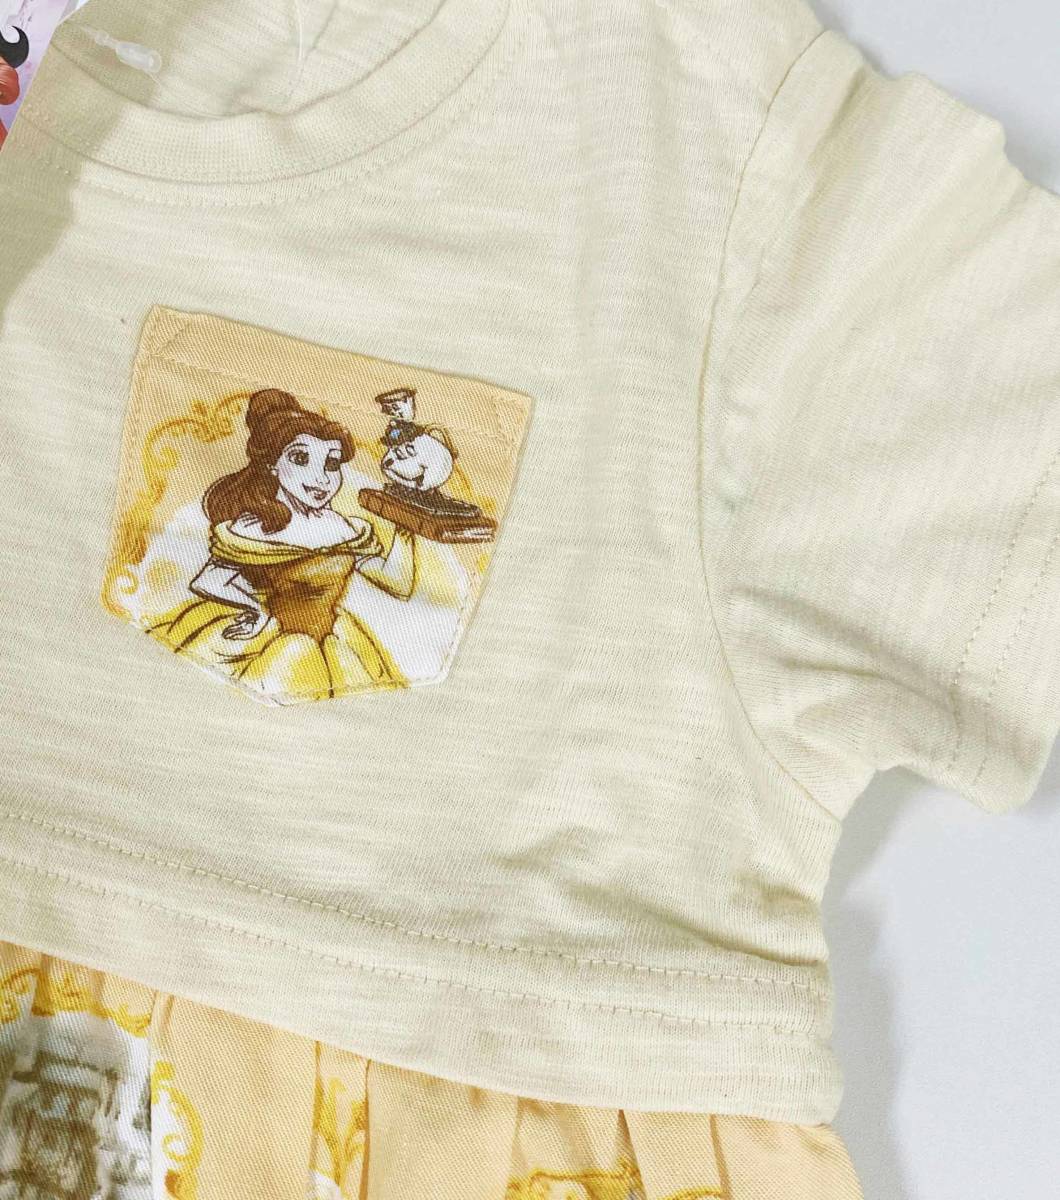  new goods 90 * cost ko Beauty and the Beast bell One-piece Disney Princess short sleeves cotton do King dress Disney Princess BELLE yellow color 